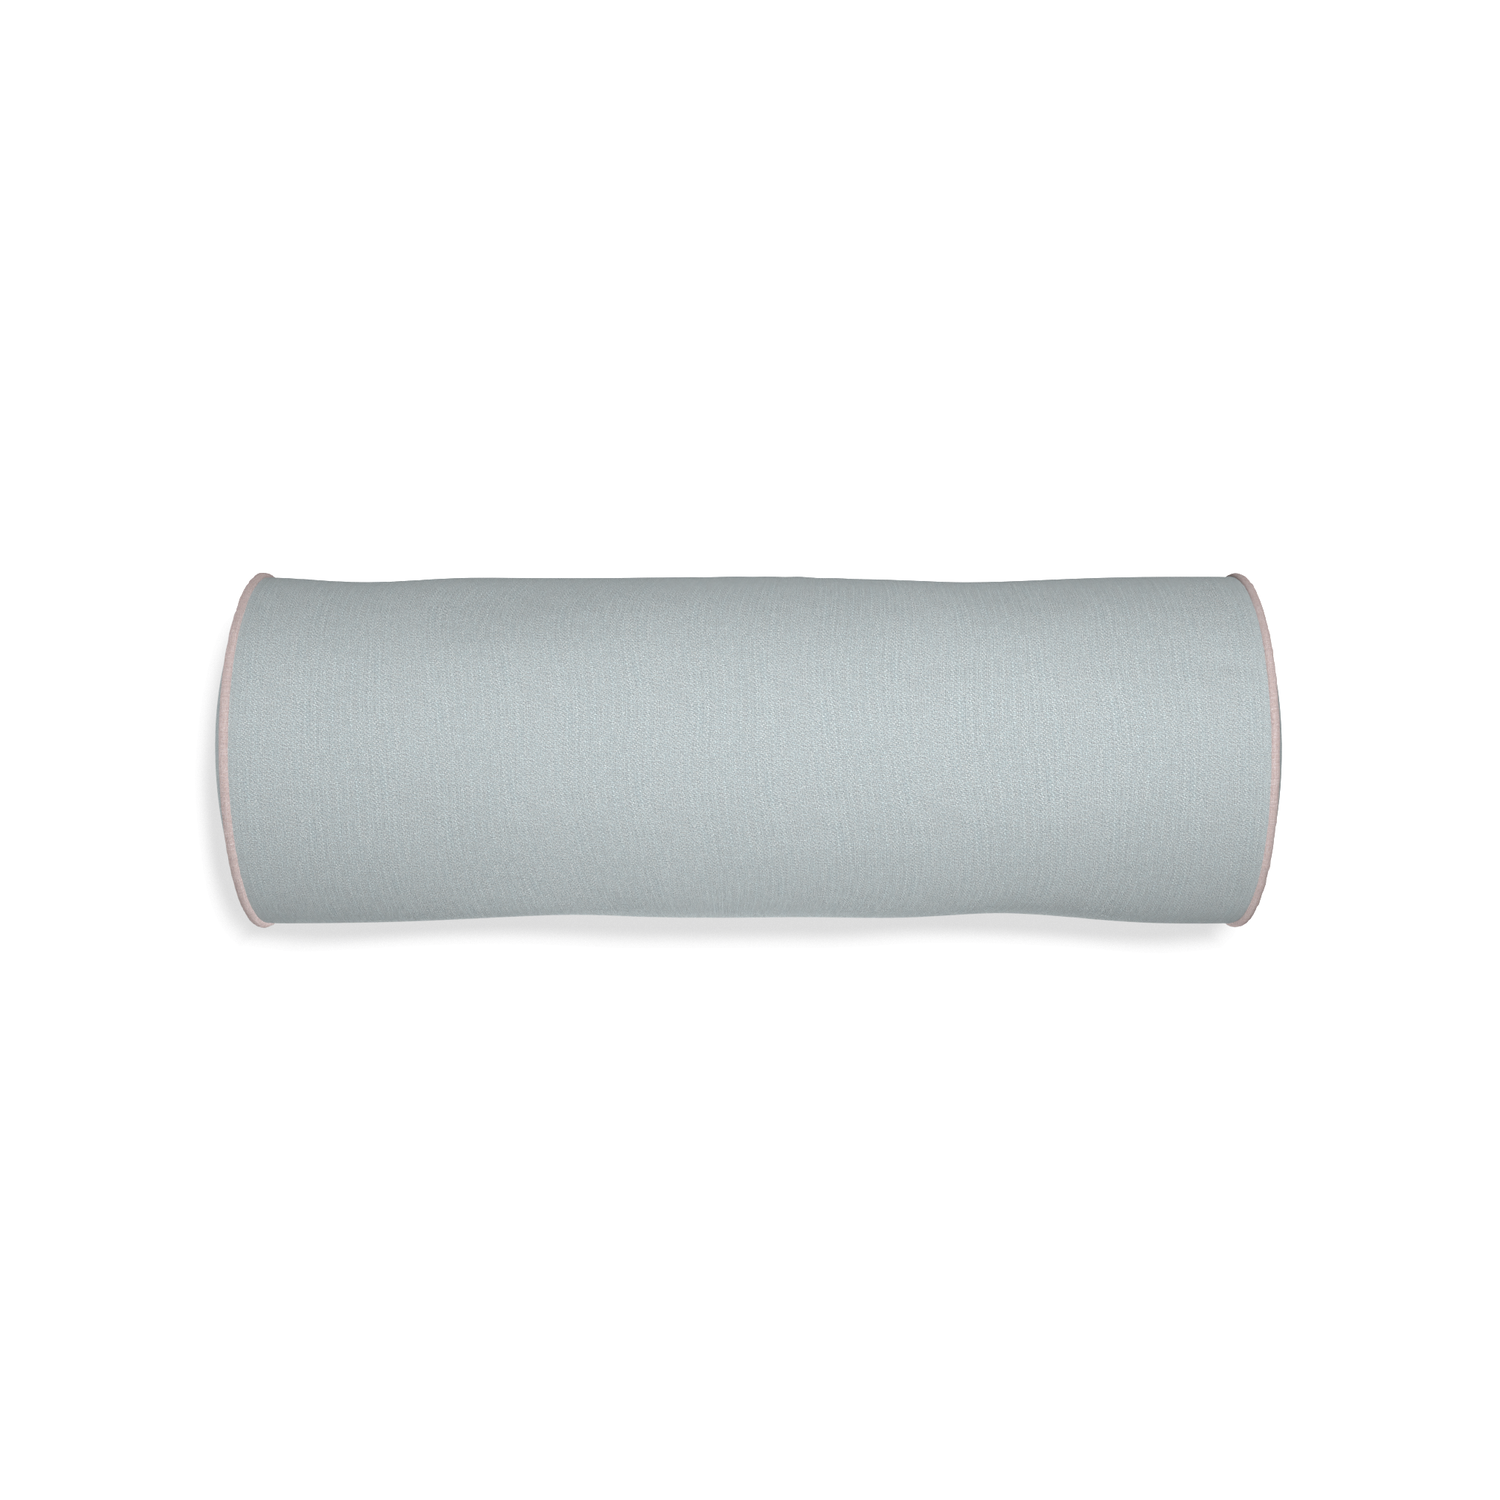 Bolster sea custom grey bluepillow with orchid piping on white background